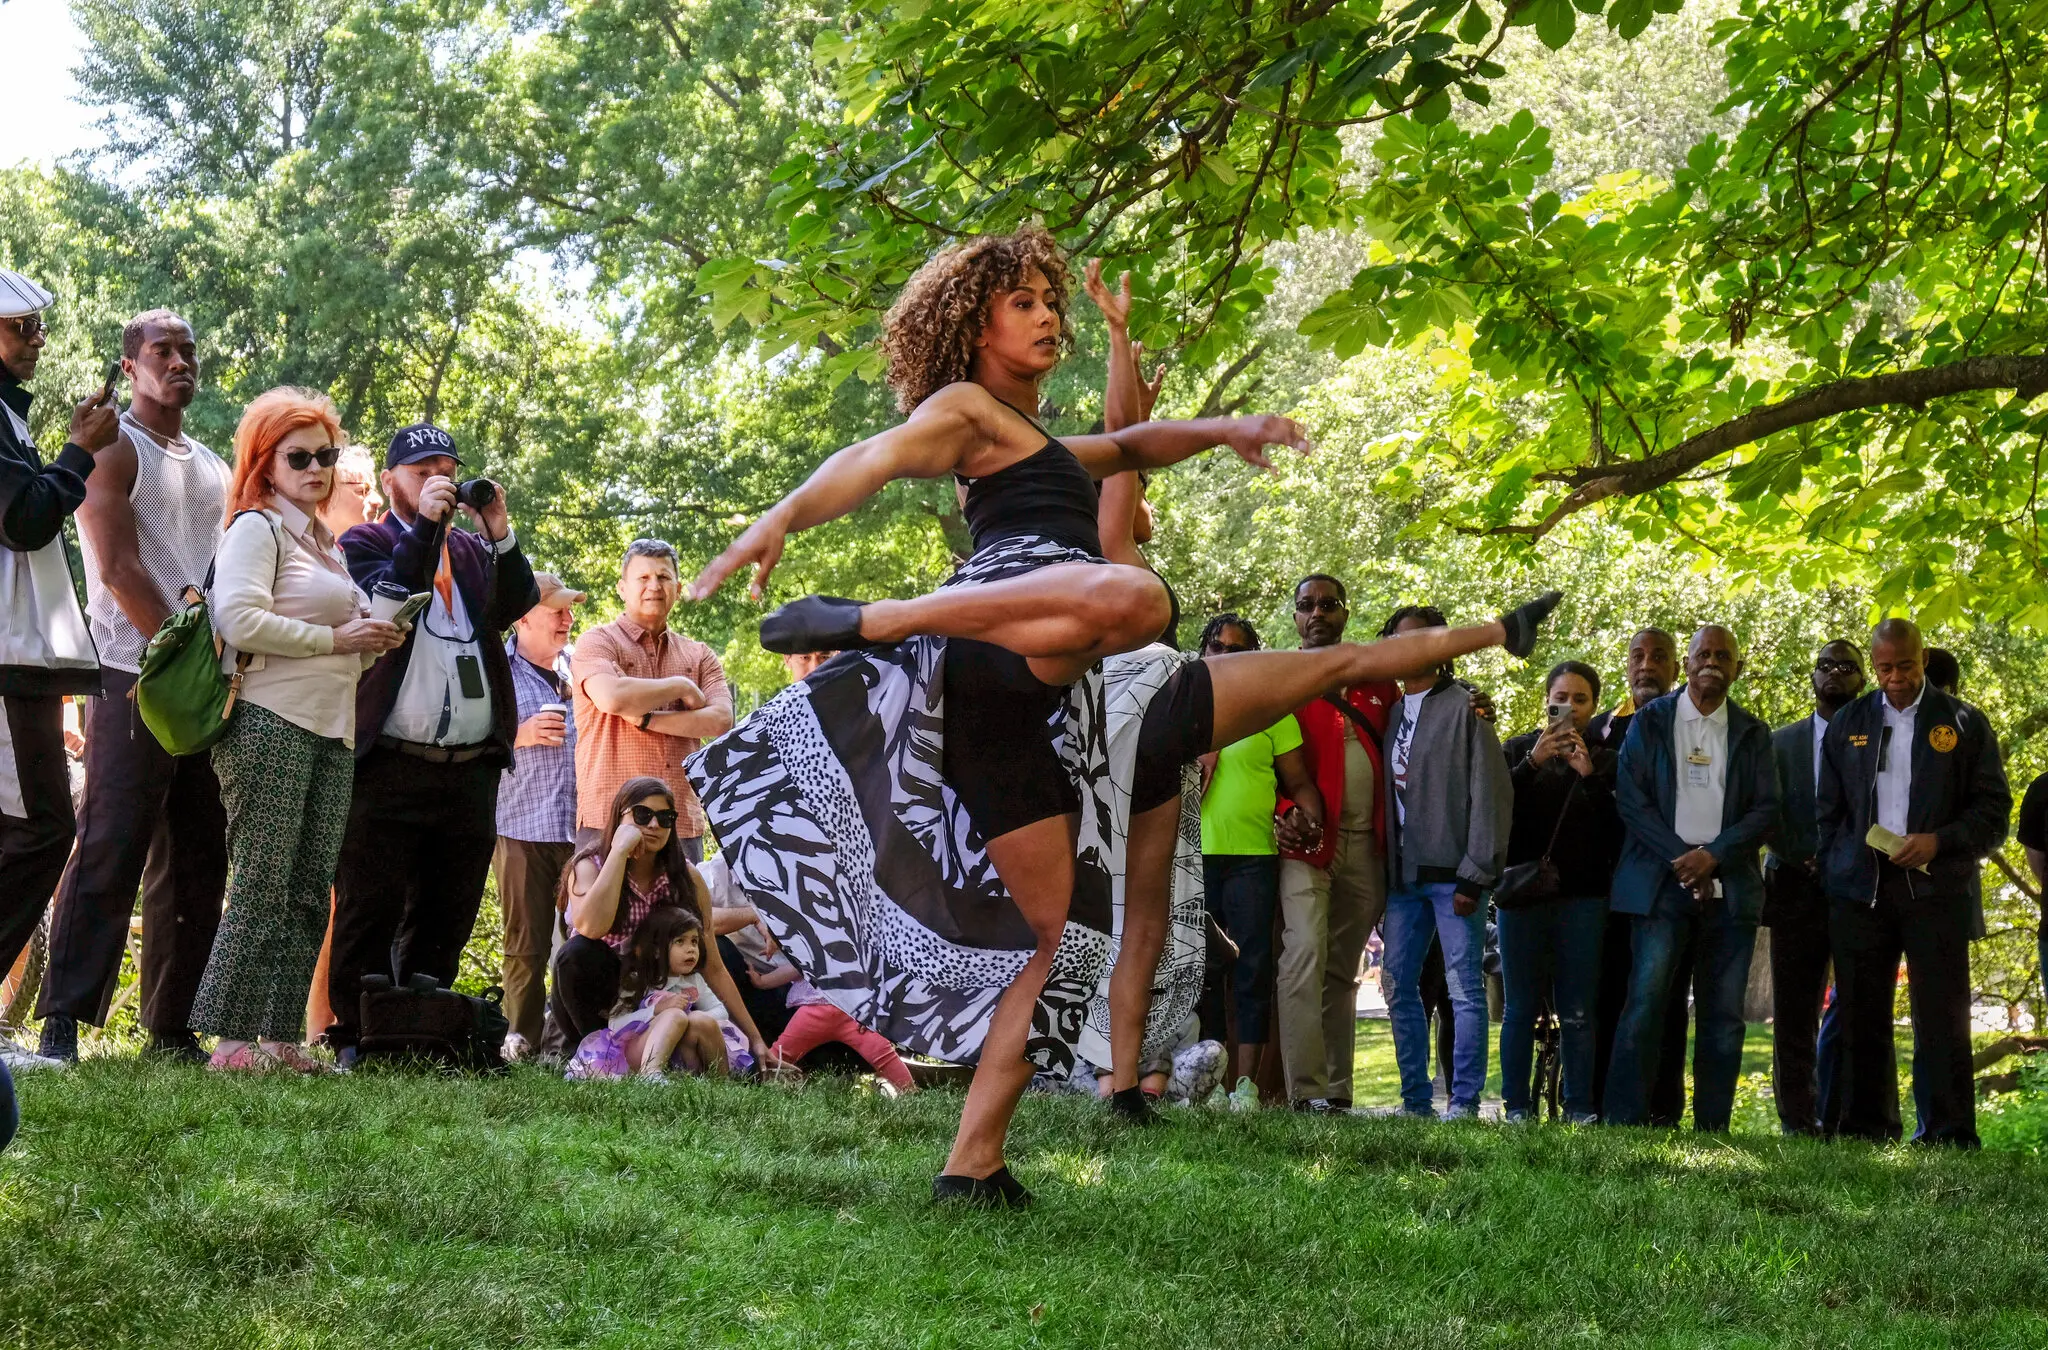 An interpretative dance at a Juneteenth event at the NYC Central Park